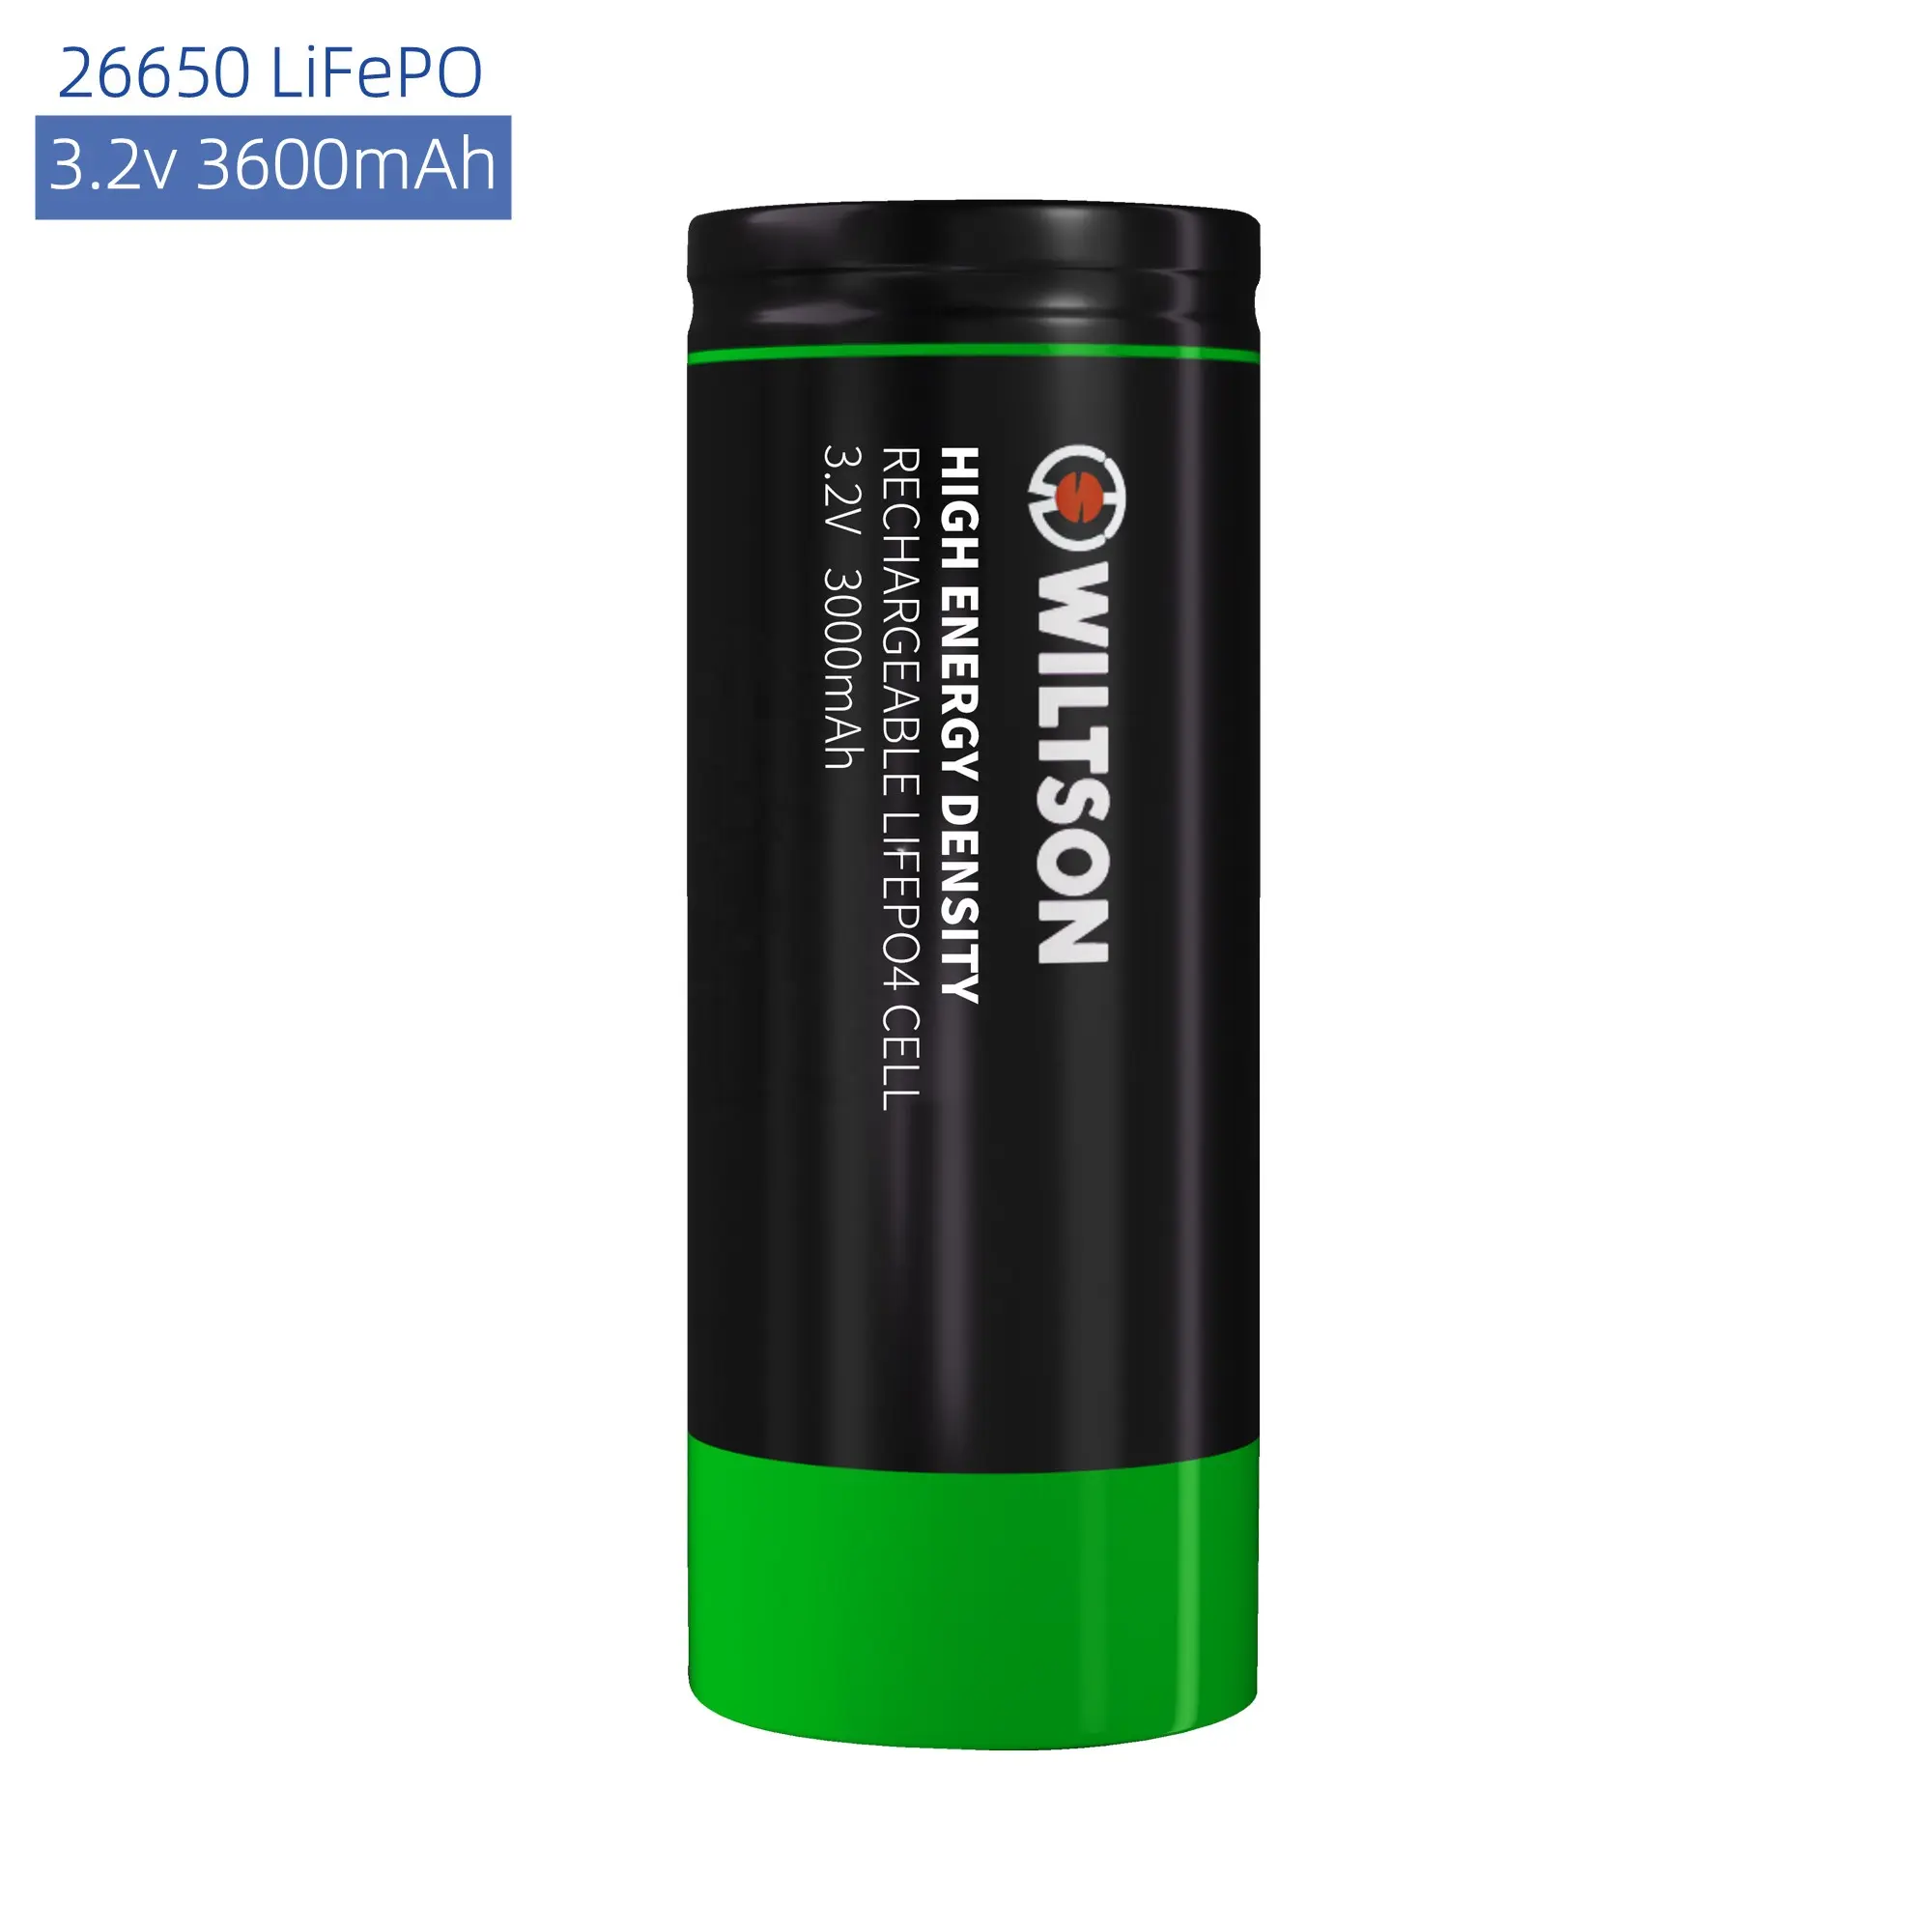 26650 canada lithium ion battery cell lfp IFR lifepo 26650 LiFePO4 Phosphate battery 26650 3.2v 3600 mah rechargeable battery